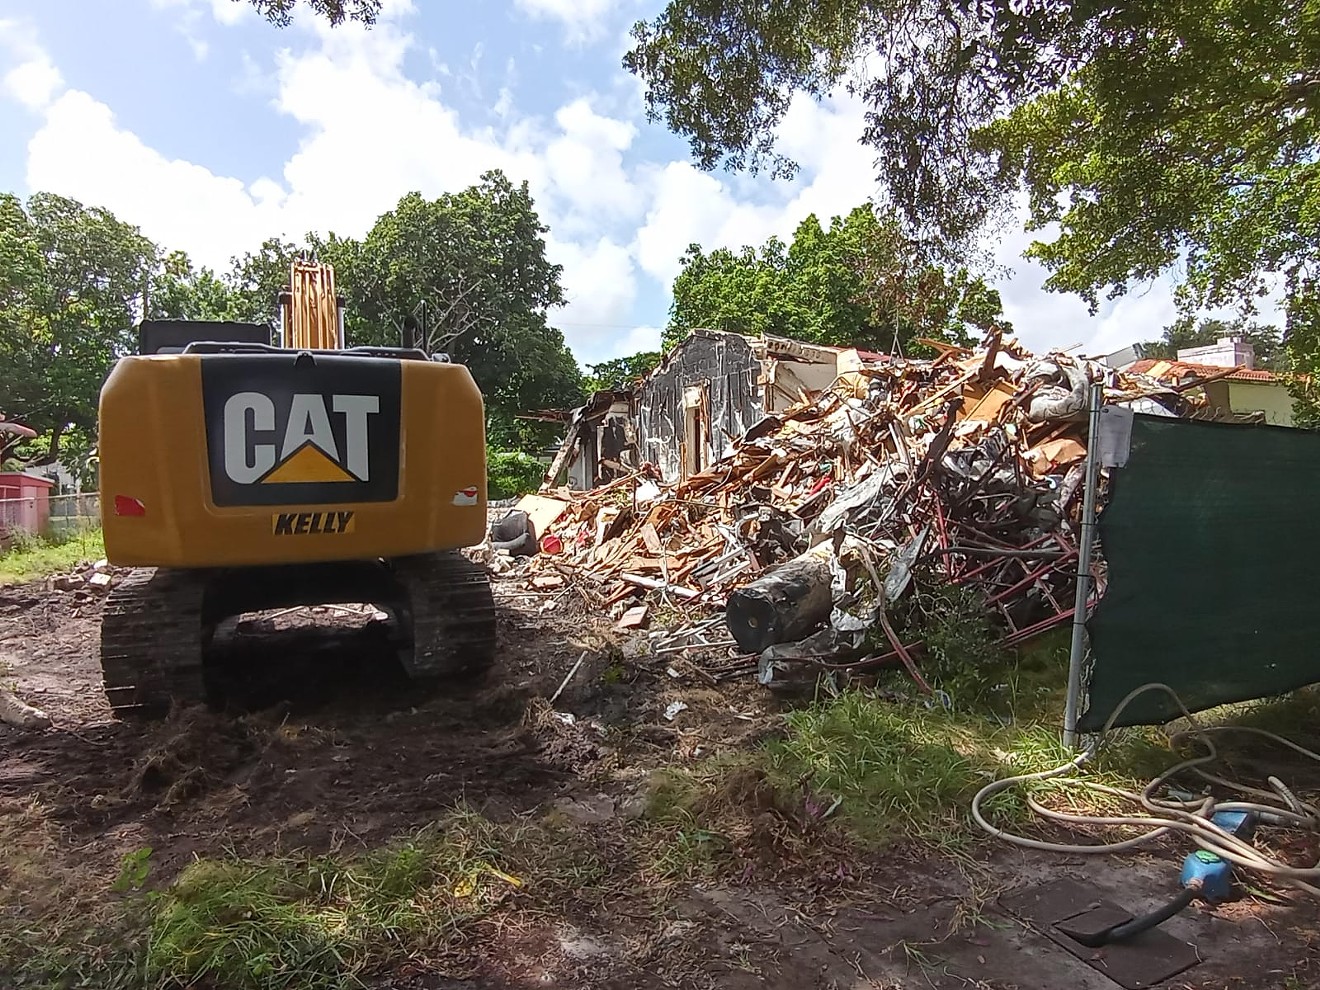 The City of Miami had Michael Hamilton's home demolished in late August.